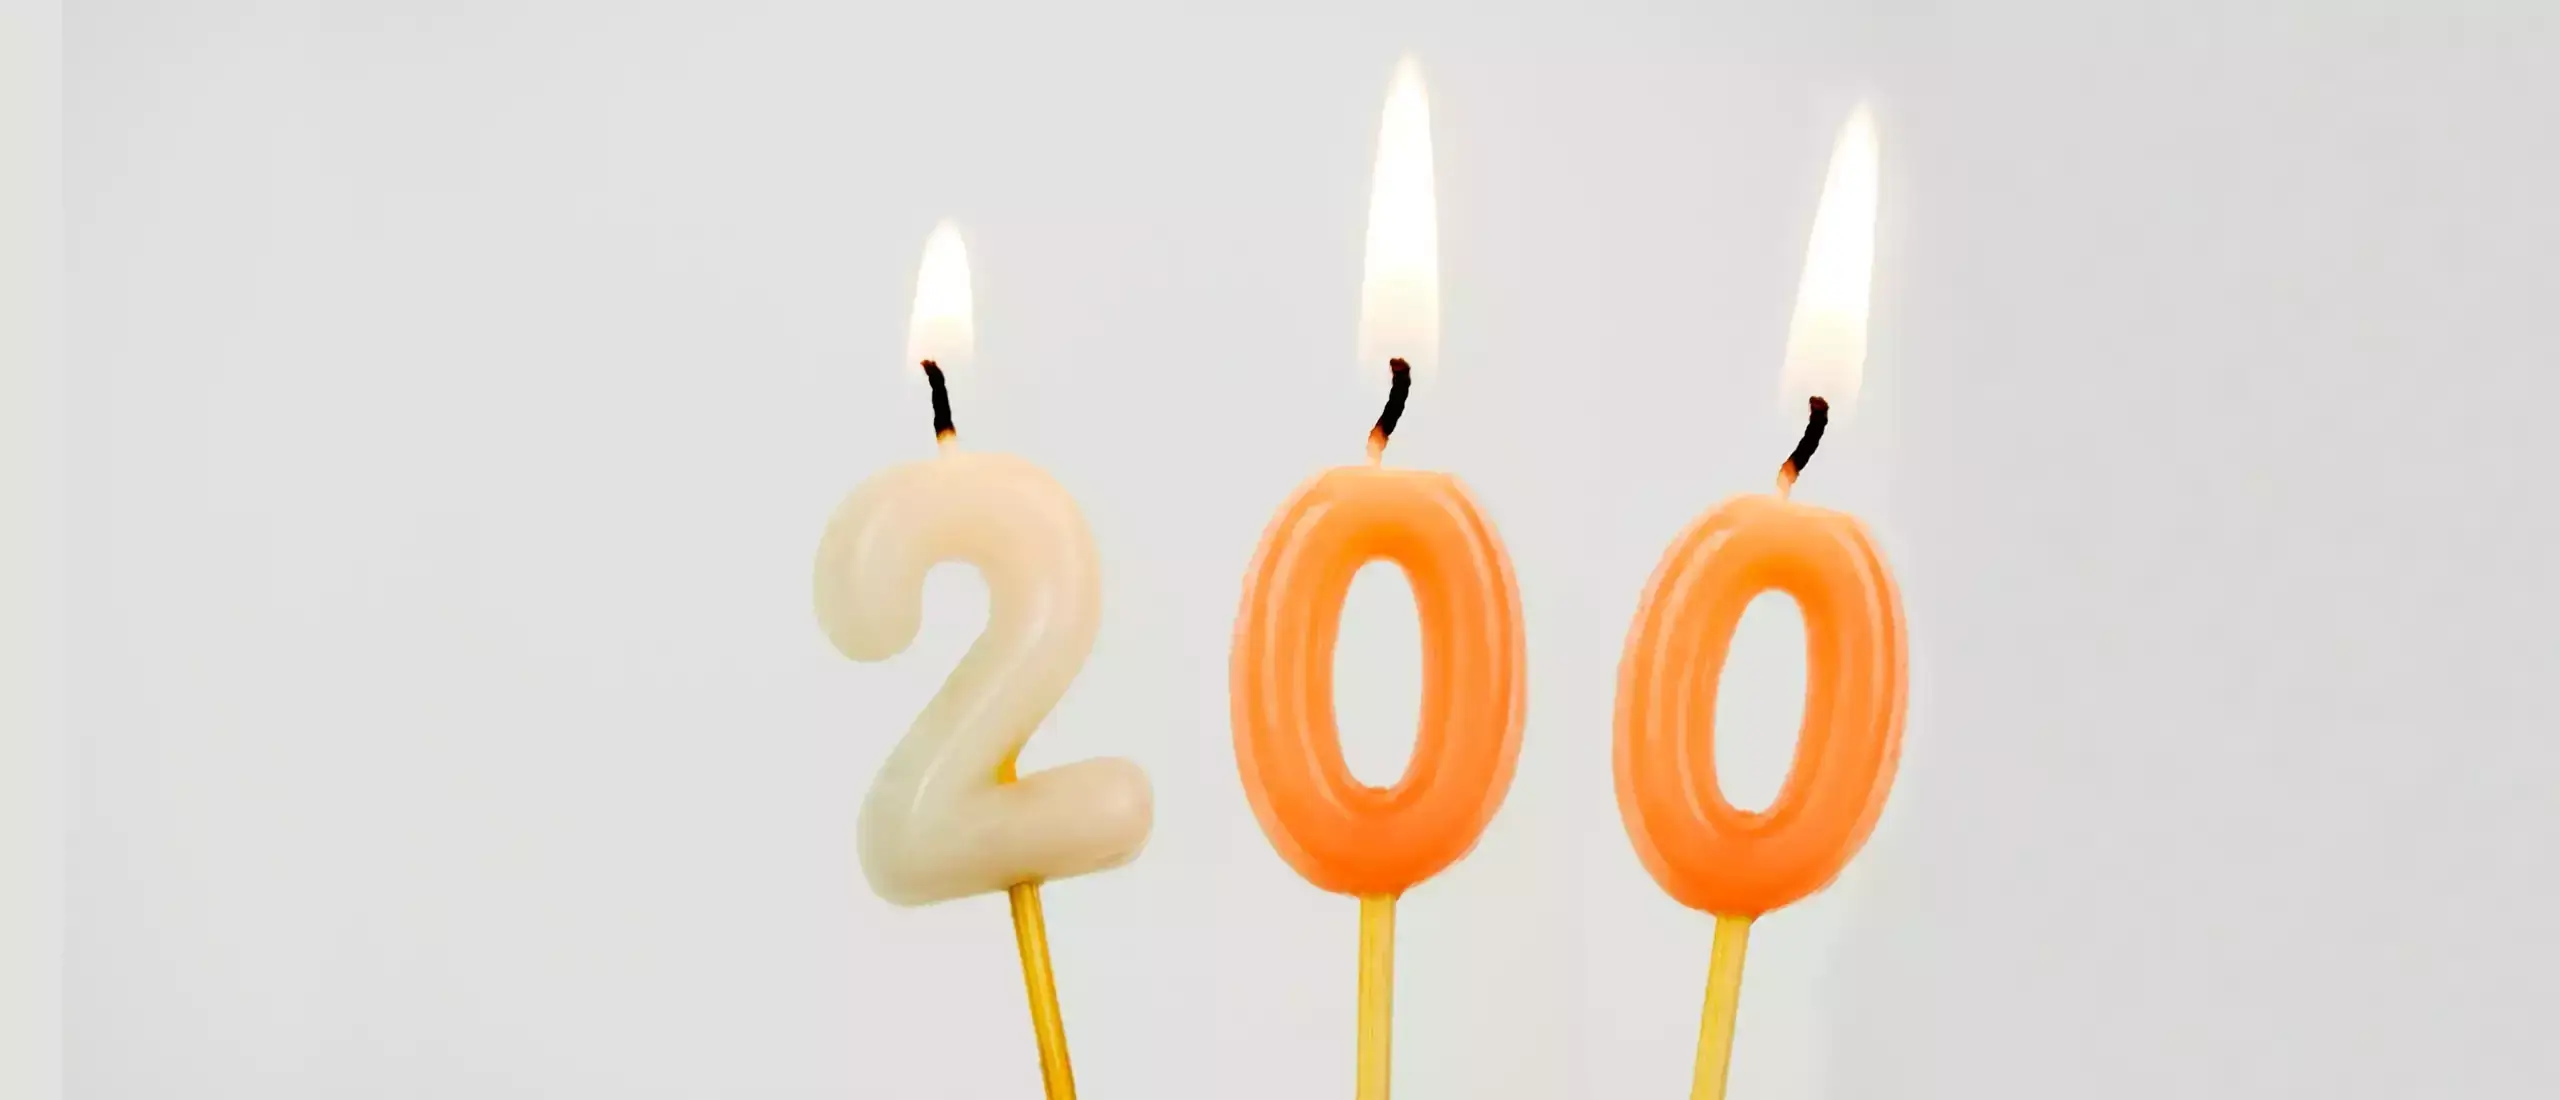 burning candles for 200